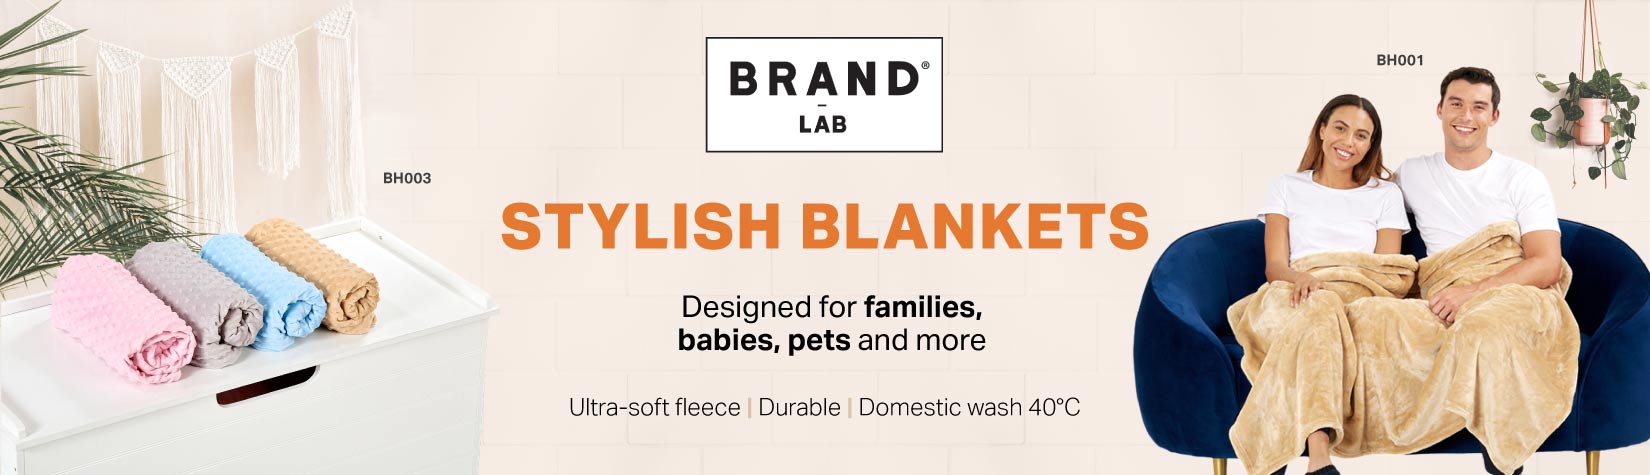 Stylish blankets from Brand Lab